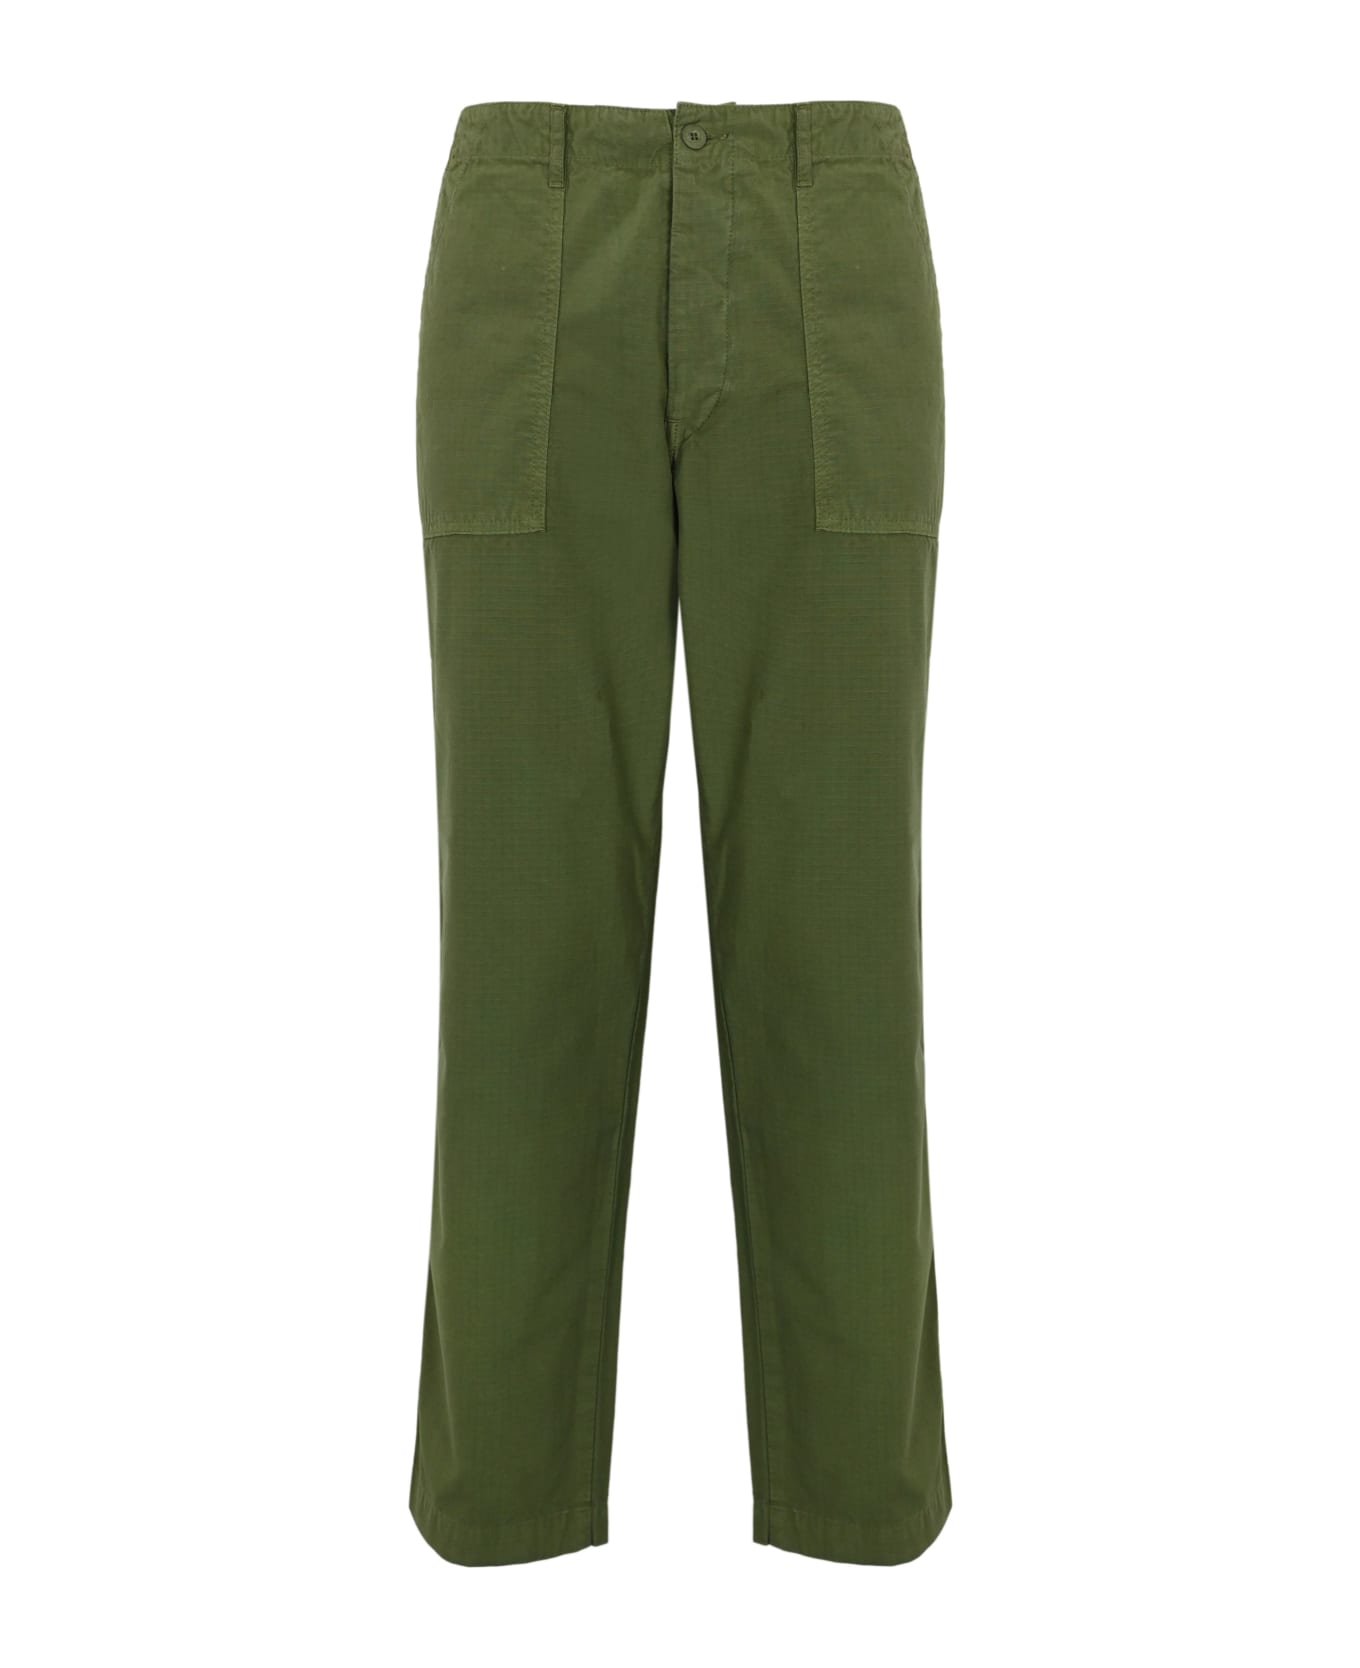 Roy Rogers Trousers With Big Pockets And Patches - Green ボトムス